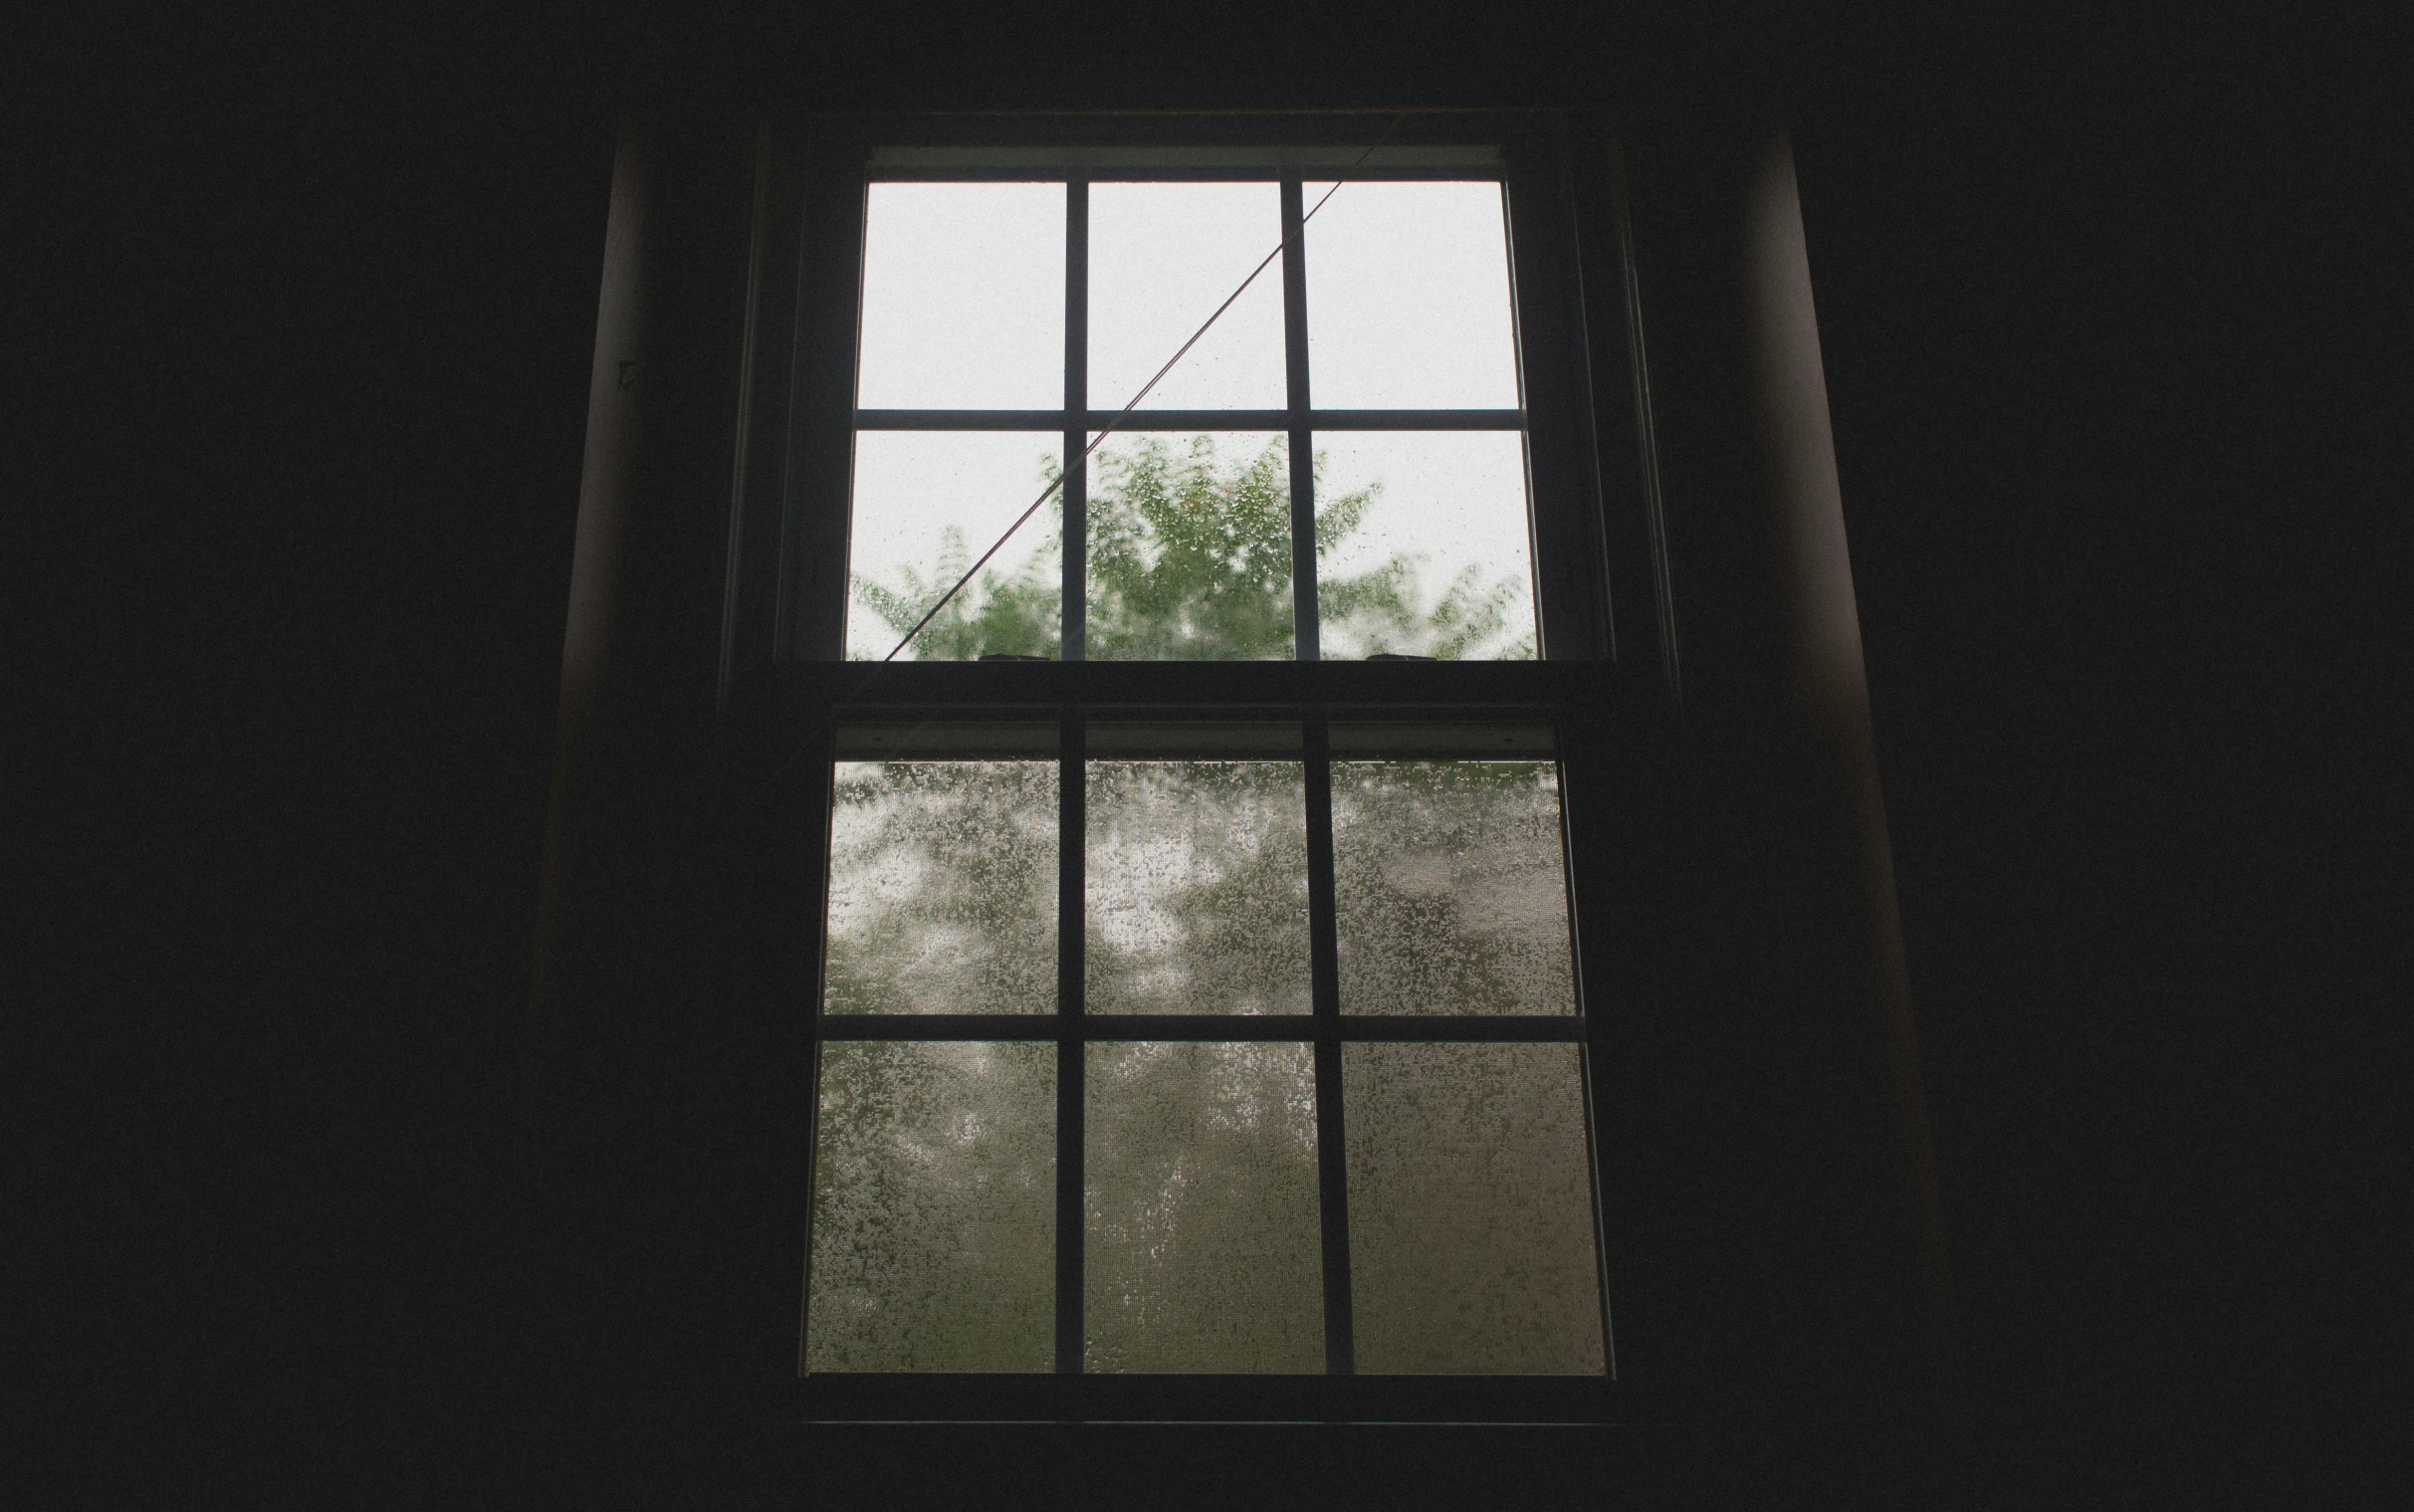 the window is open to show a foggy tree